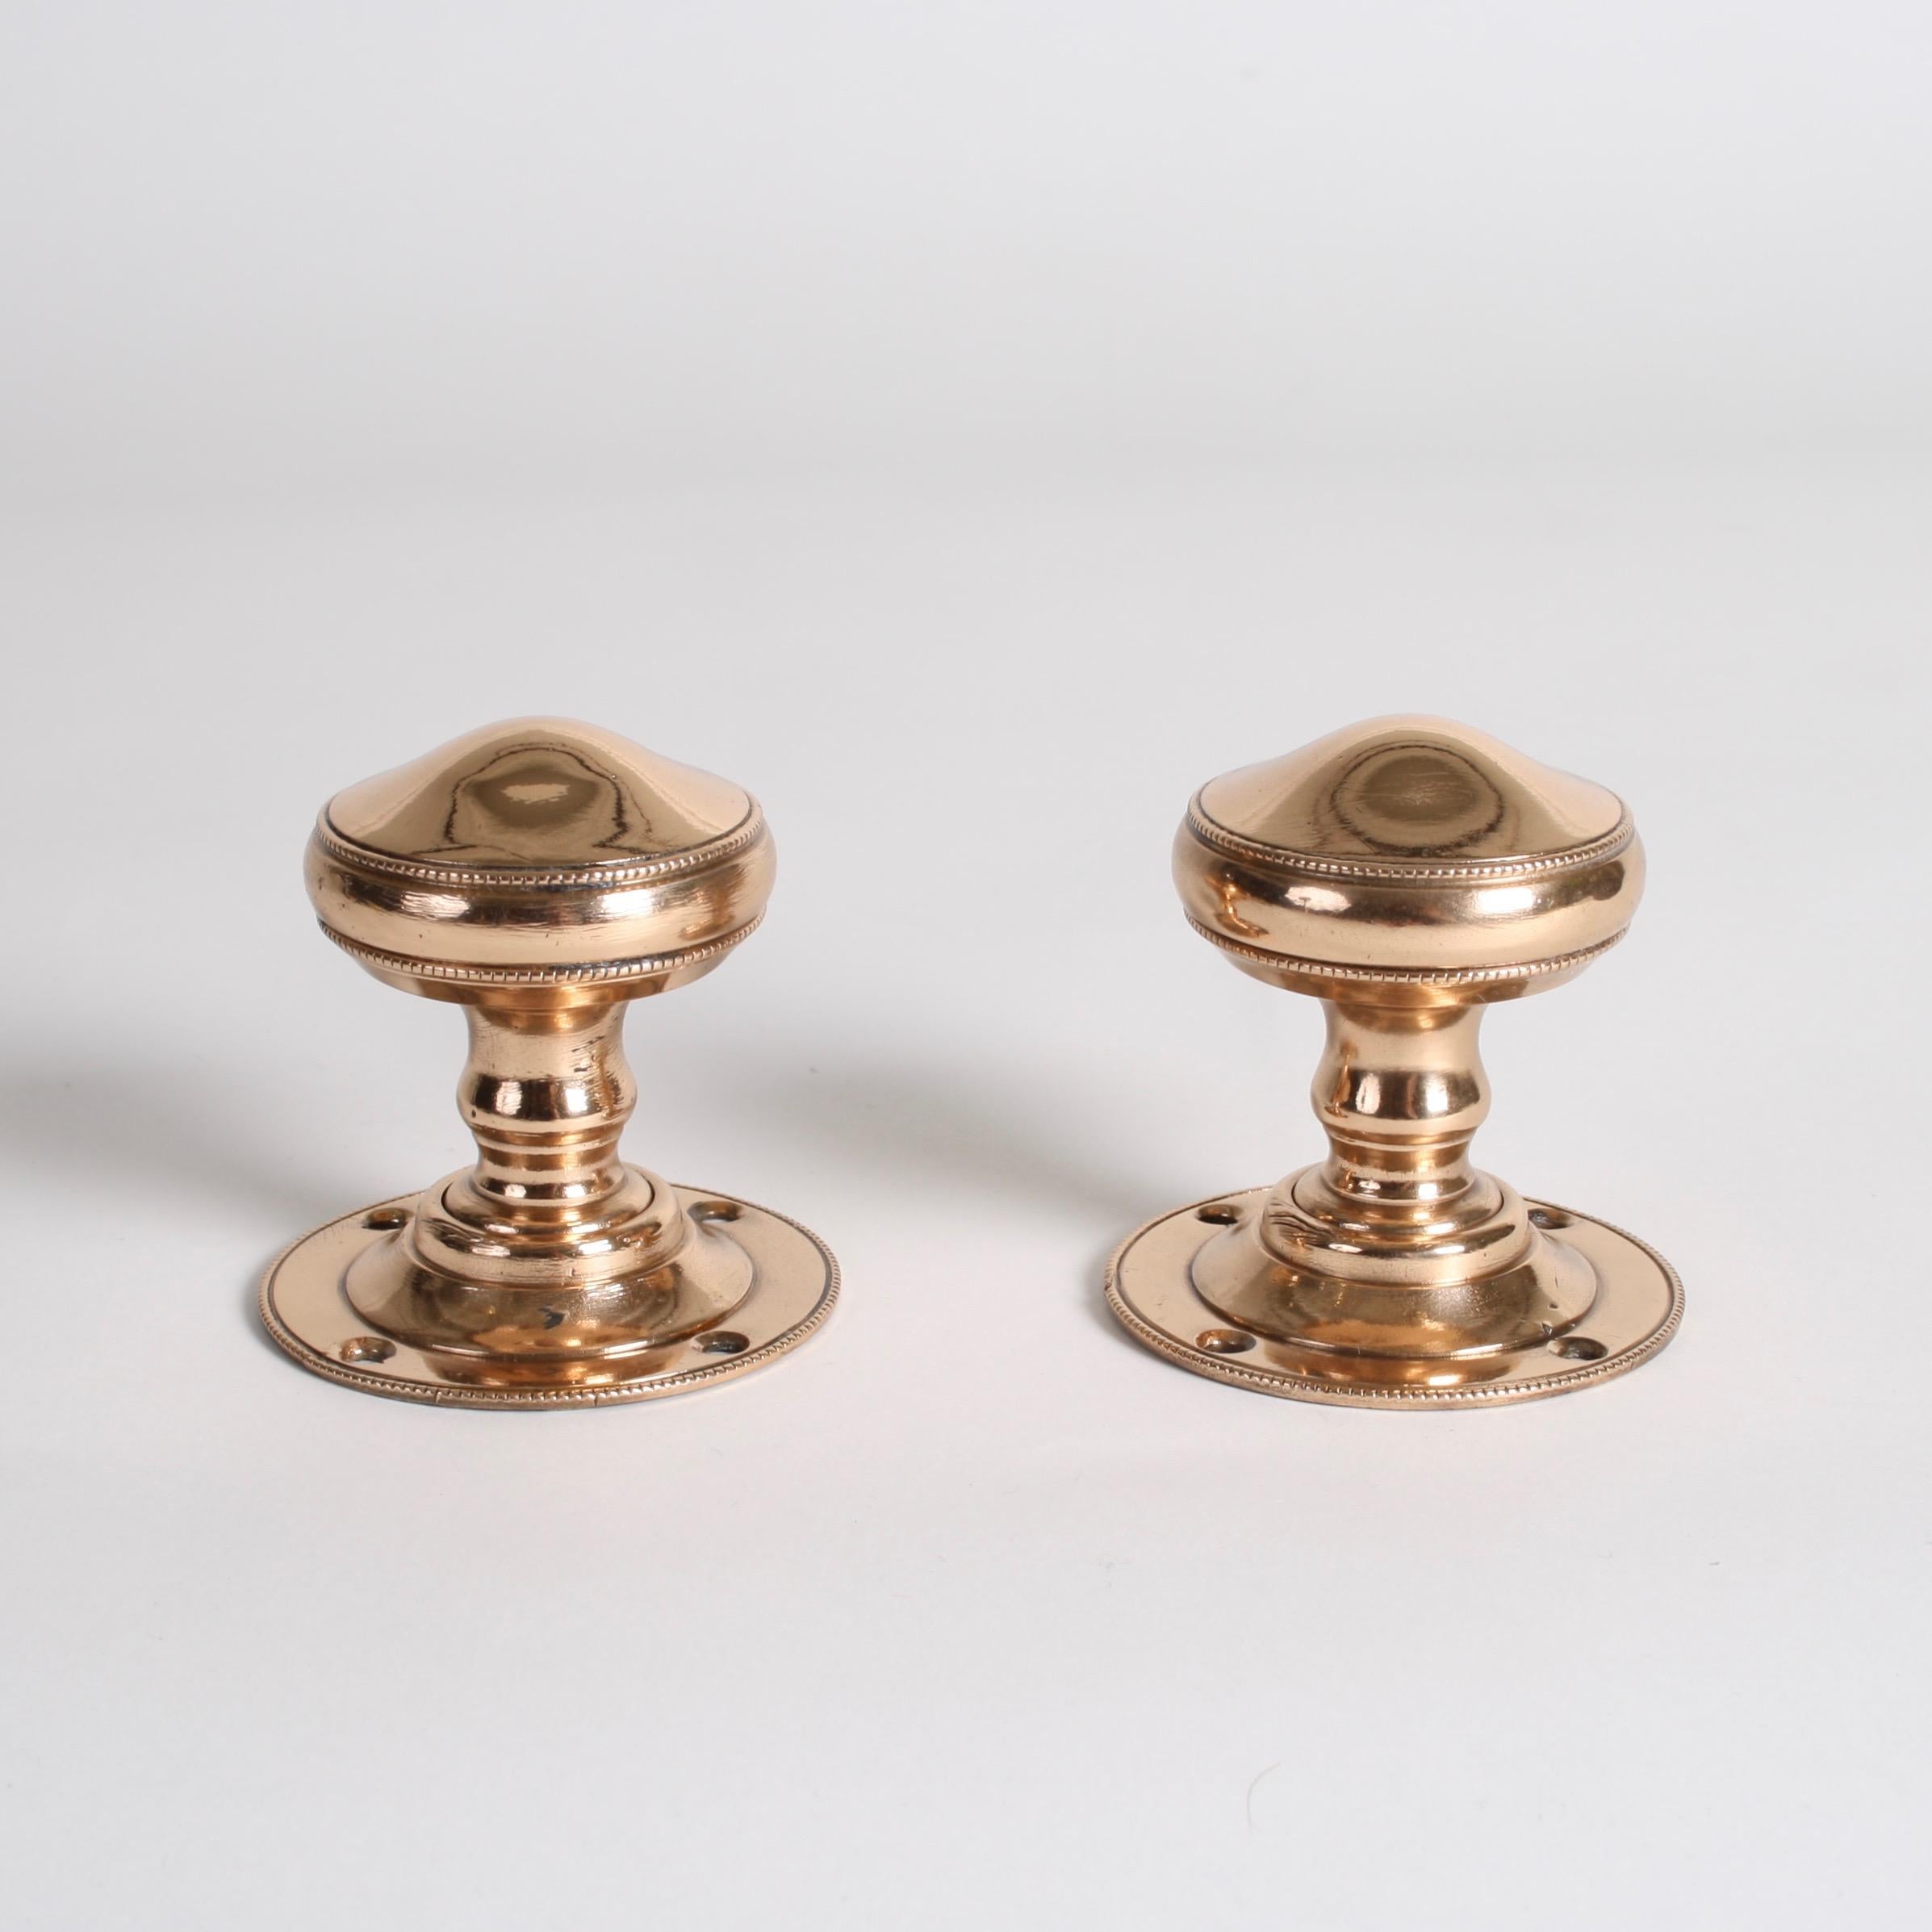 A pair of Edwardian rose brass door knobs with piping to outer edges.